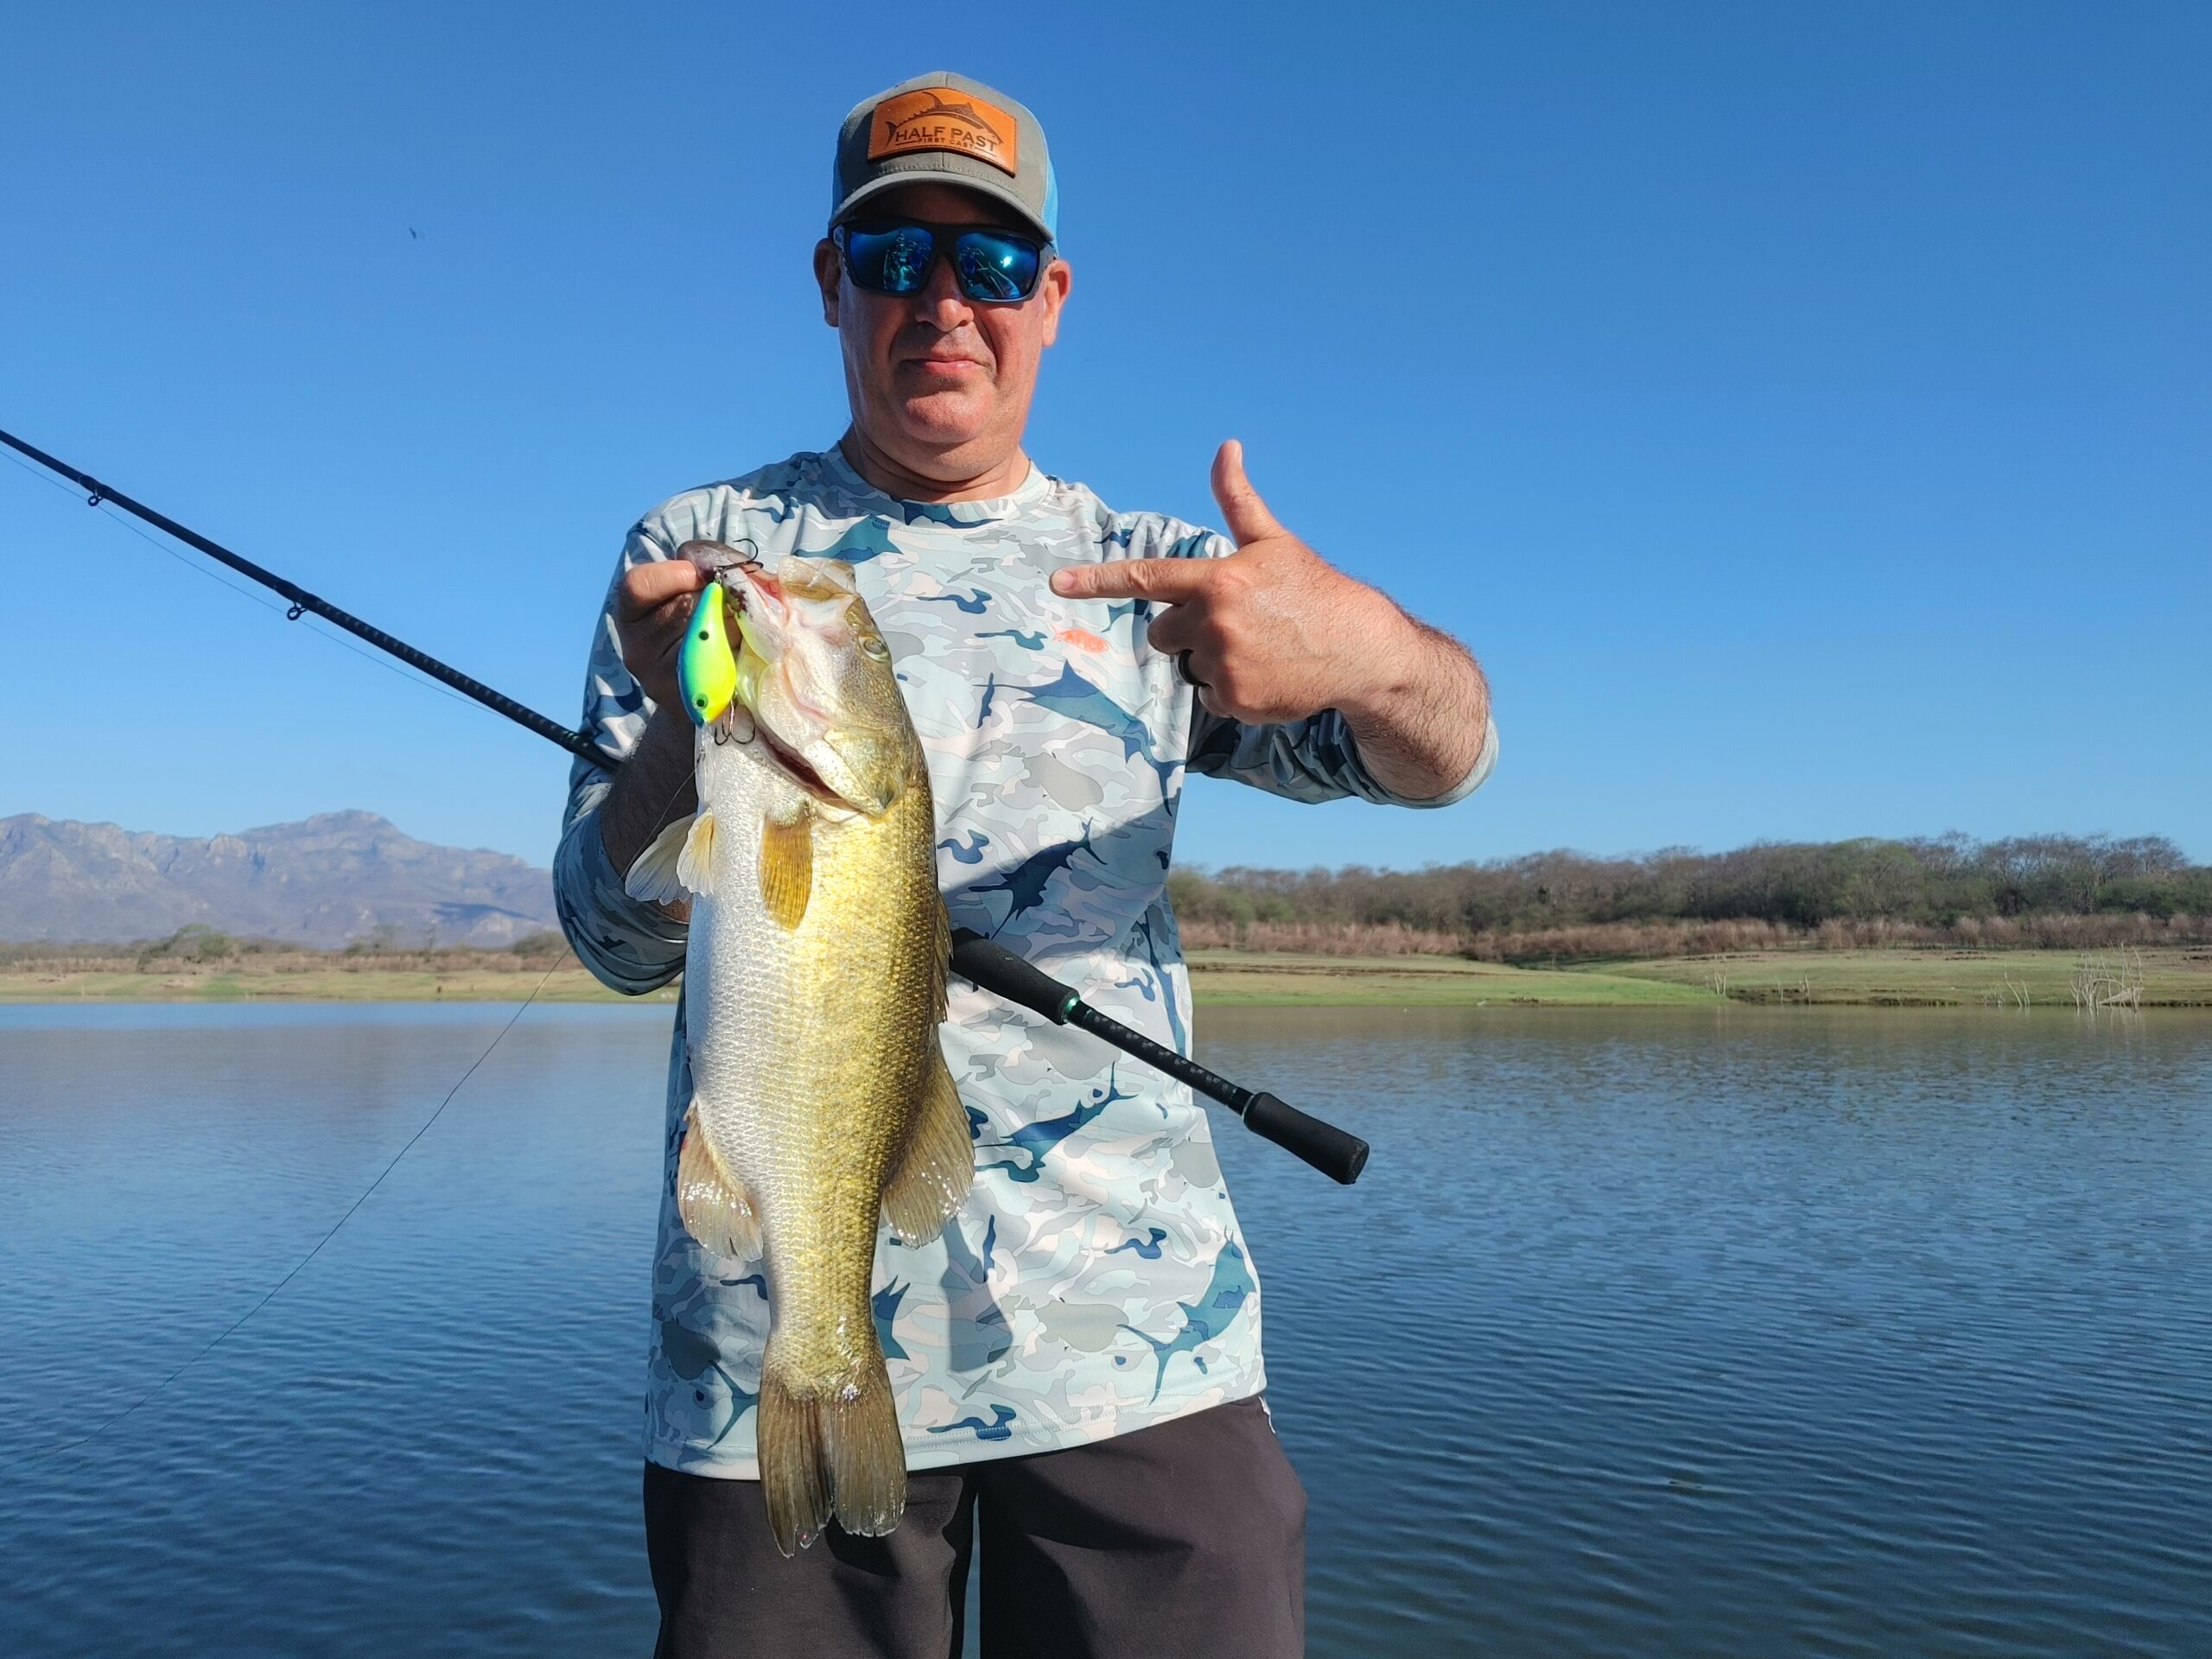 The author with a fish caught on a crankbait and a baitcasting reel